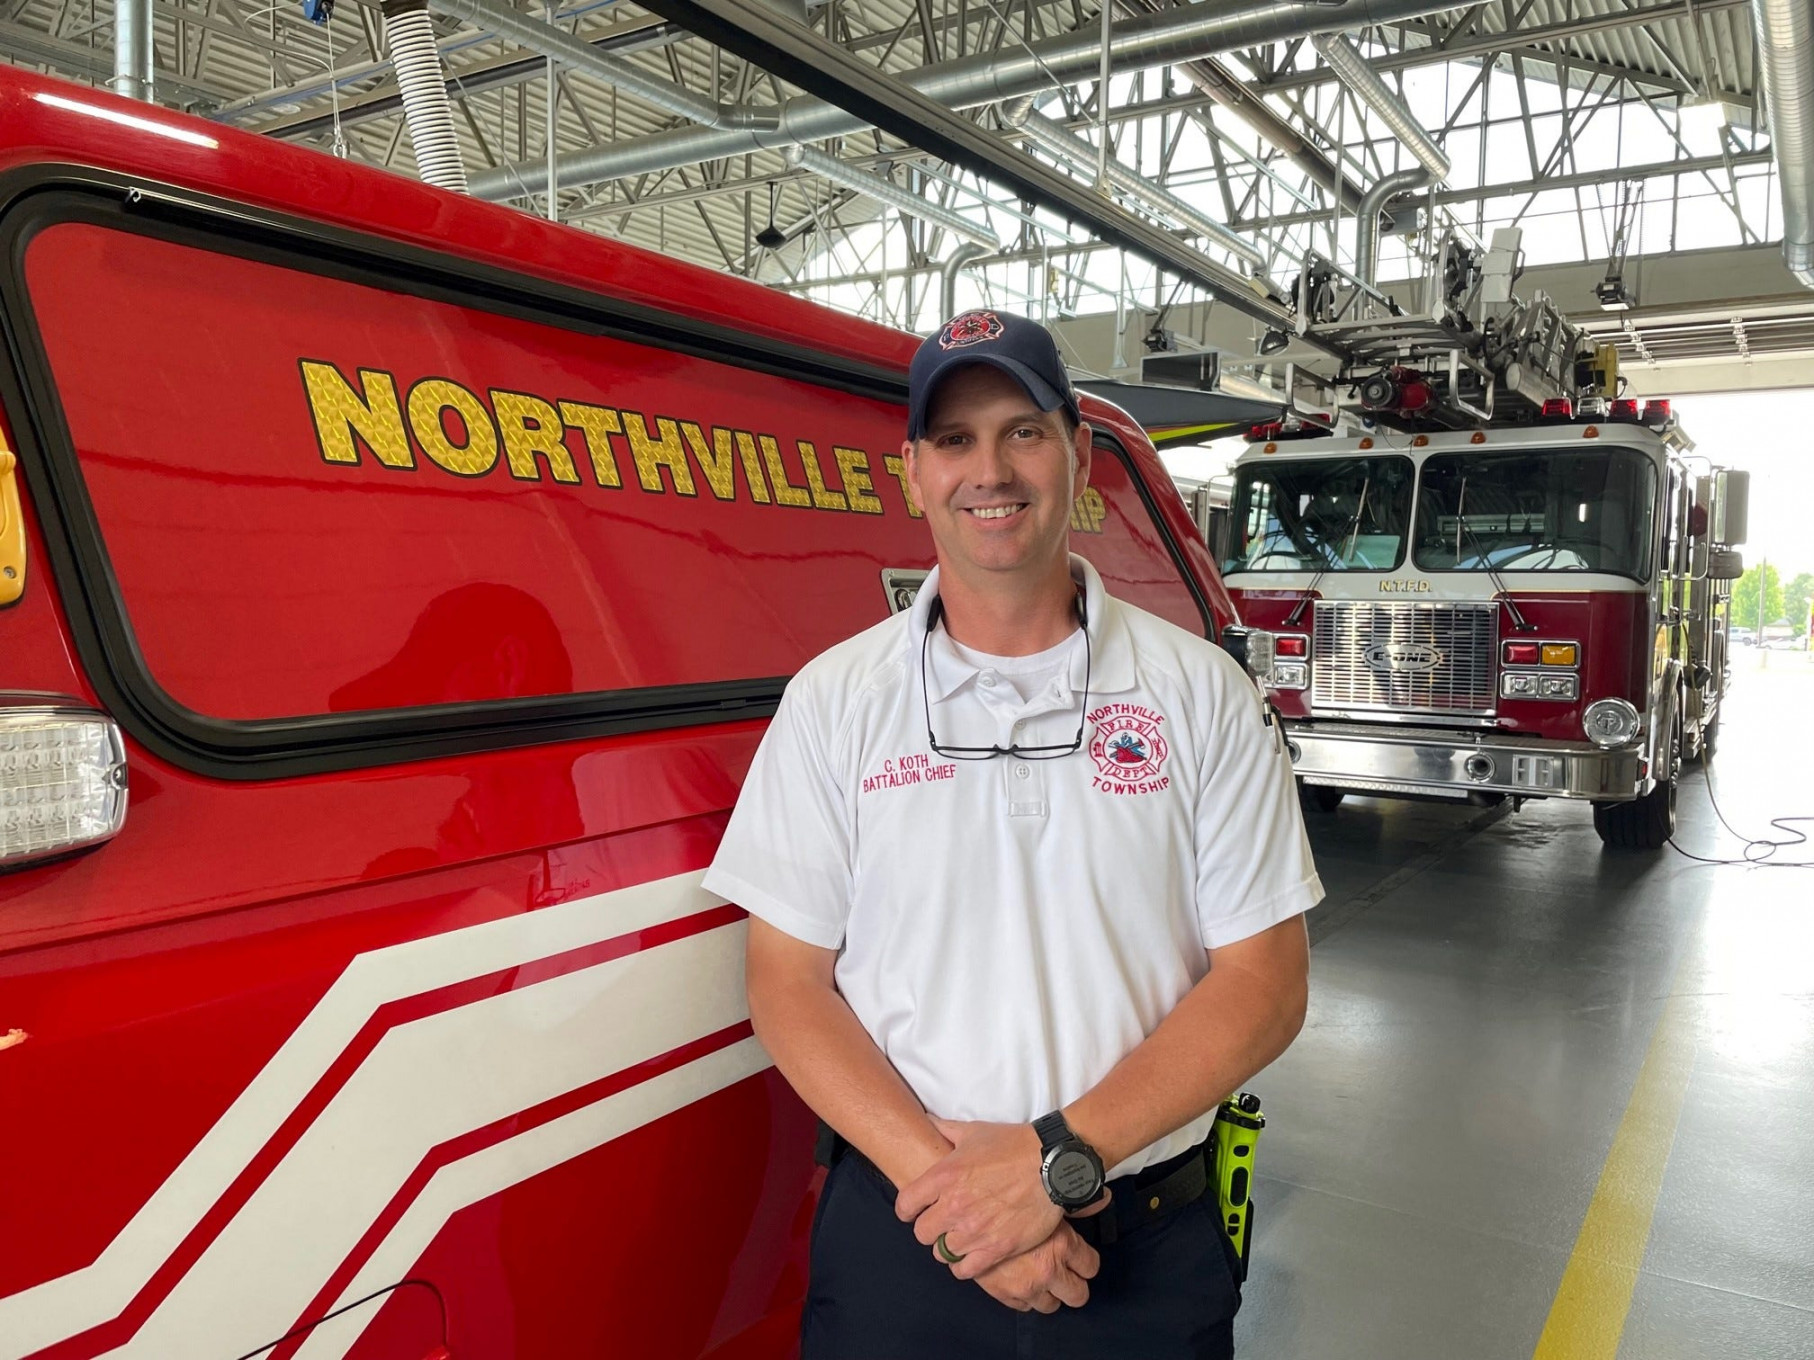 Two longtime Northville Township firefighters eye new opportunities